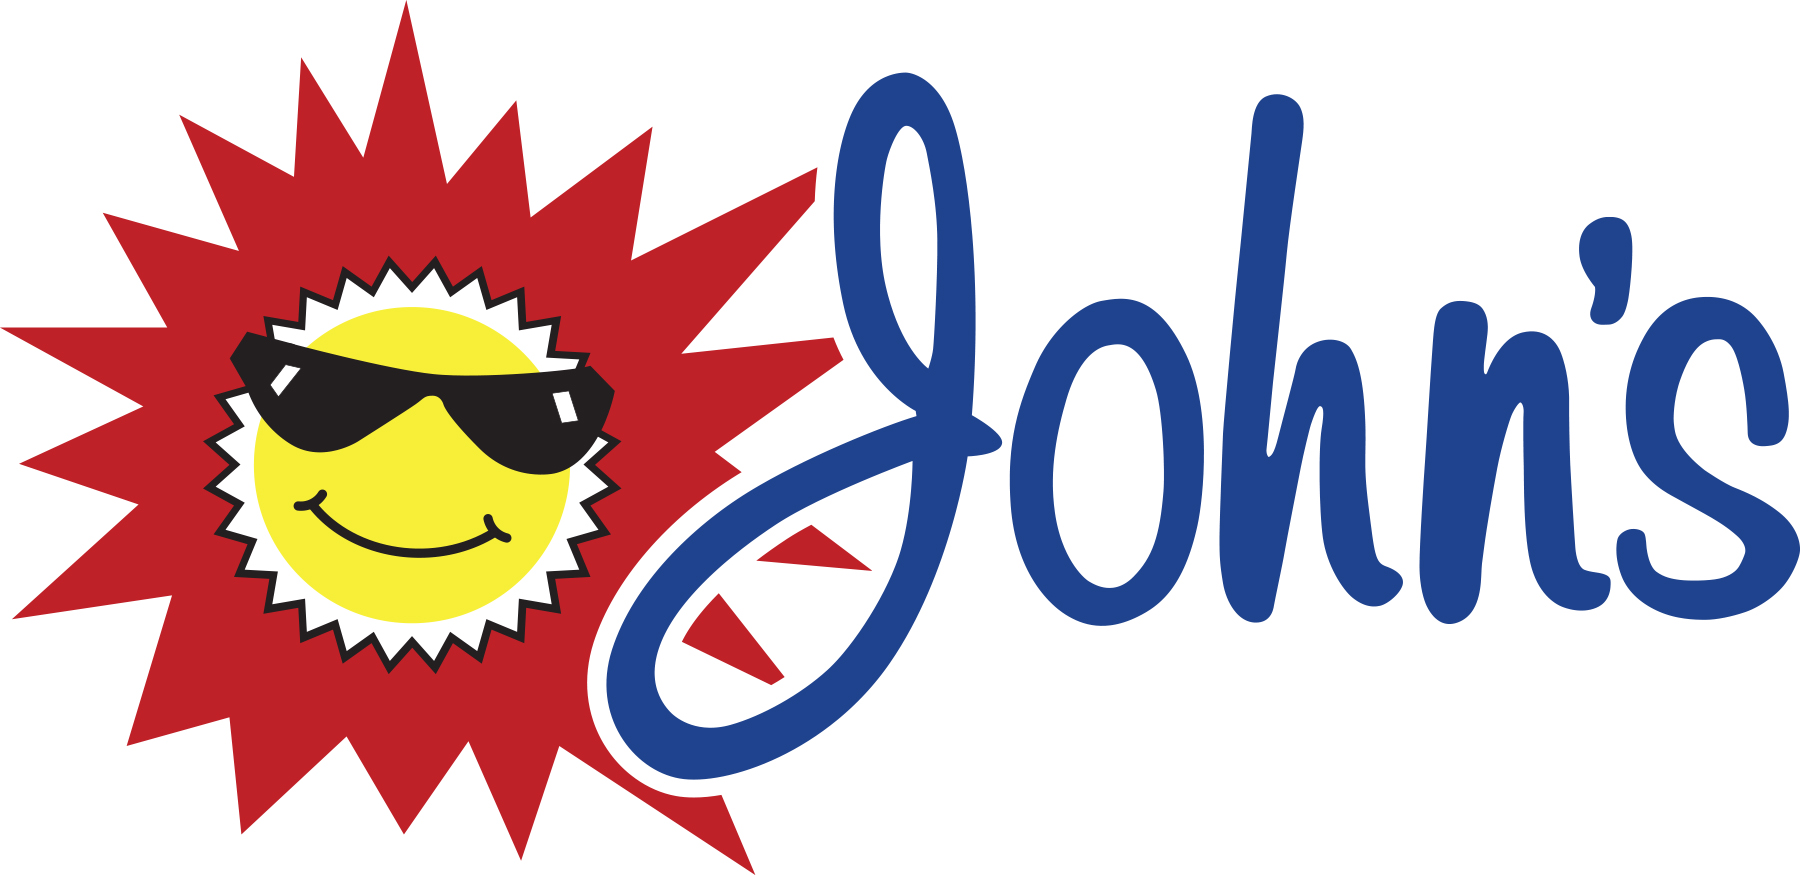 To get an estimate on Heater replacement in Mesa AZ, call John’s Heating, Cooling, and Plumbing!